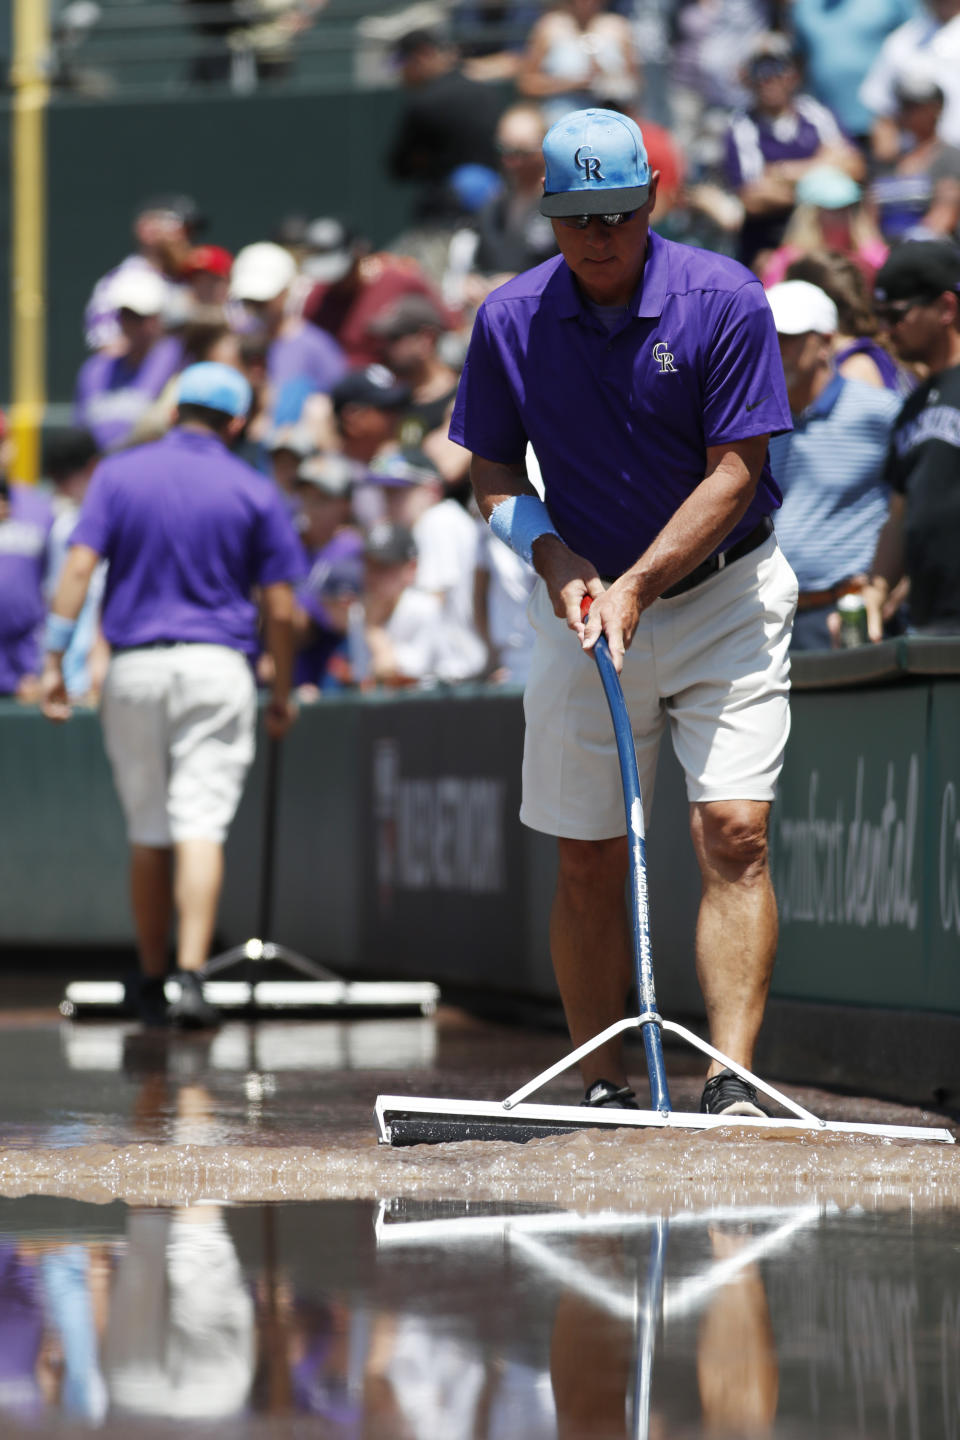 Mark Razum pushes water along the right-field stands after water discharged onto the field to create a lake in the first inning of a baseball game between the San Diego Padres and the Colorado Rockies, Sunday, June 16, 2019, in Denver. (AP Photo/David Zalubowski)